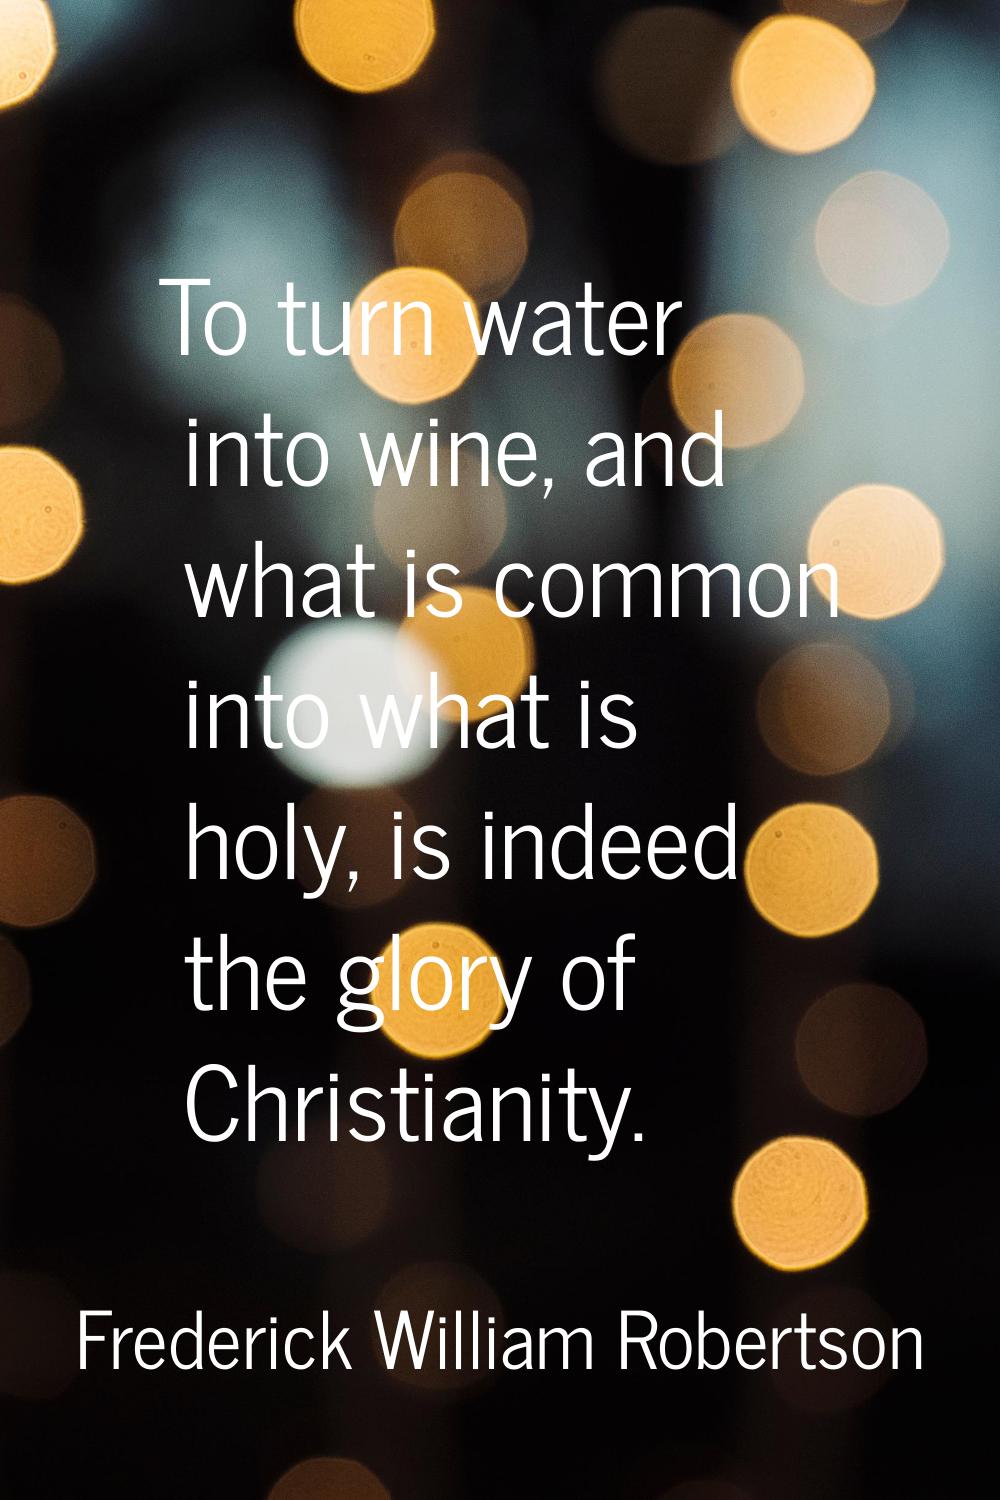 To turn water into wine, and what is common into what is holy, is indeed the glory of Christianity.